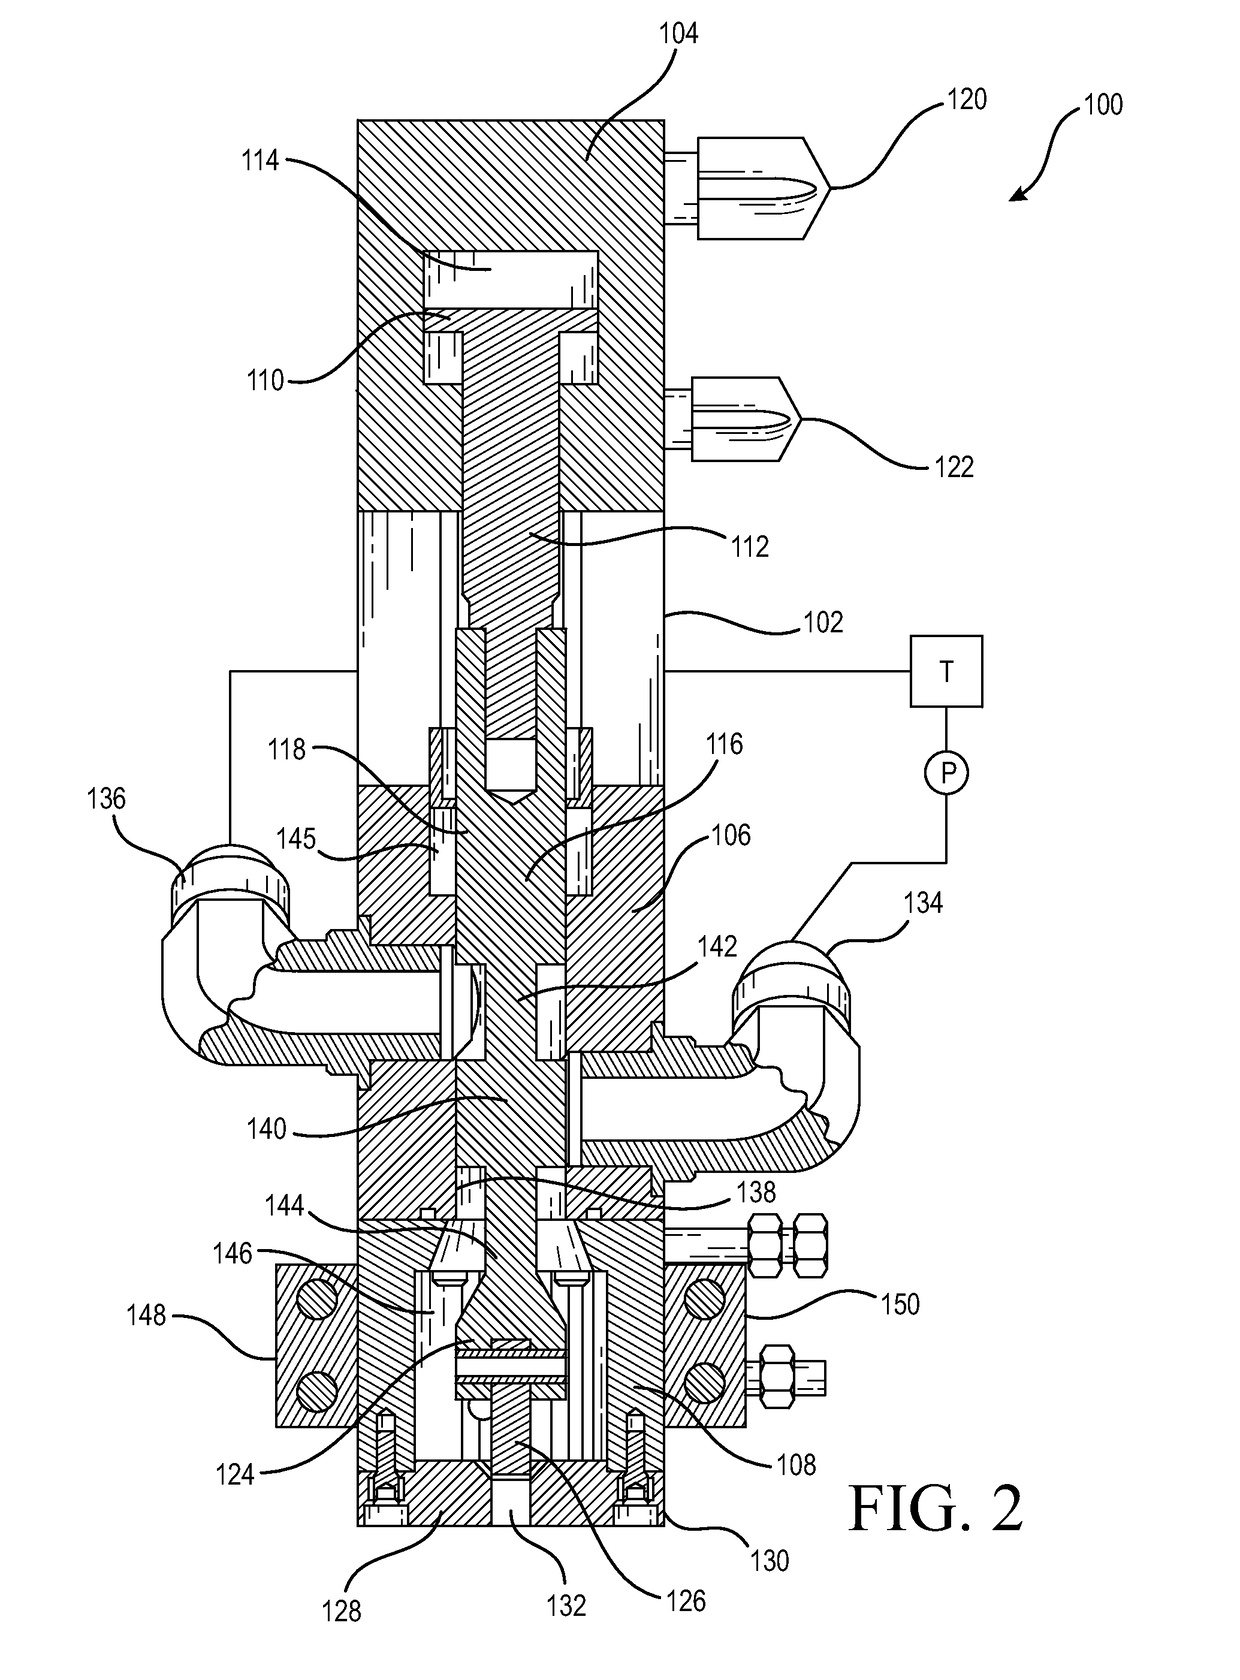 Plunger-type dispensing valve for the rapid deposition of adhesive to road pavement surfaces for enabling the fixation of pavement markers to road pavement surfaces